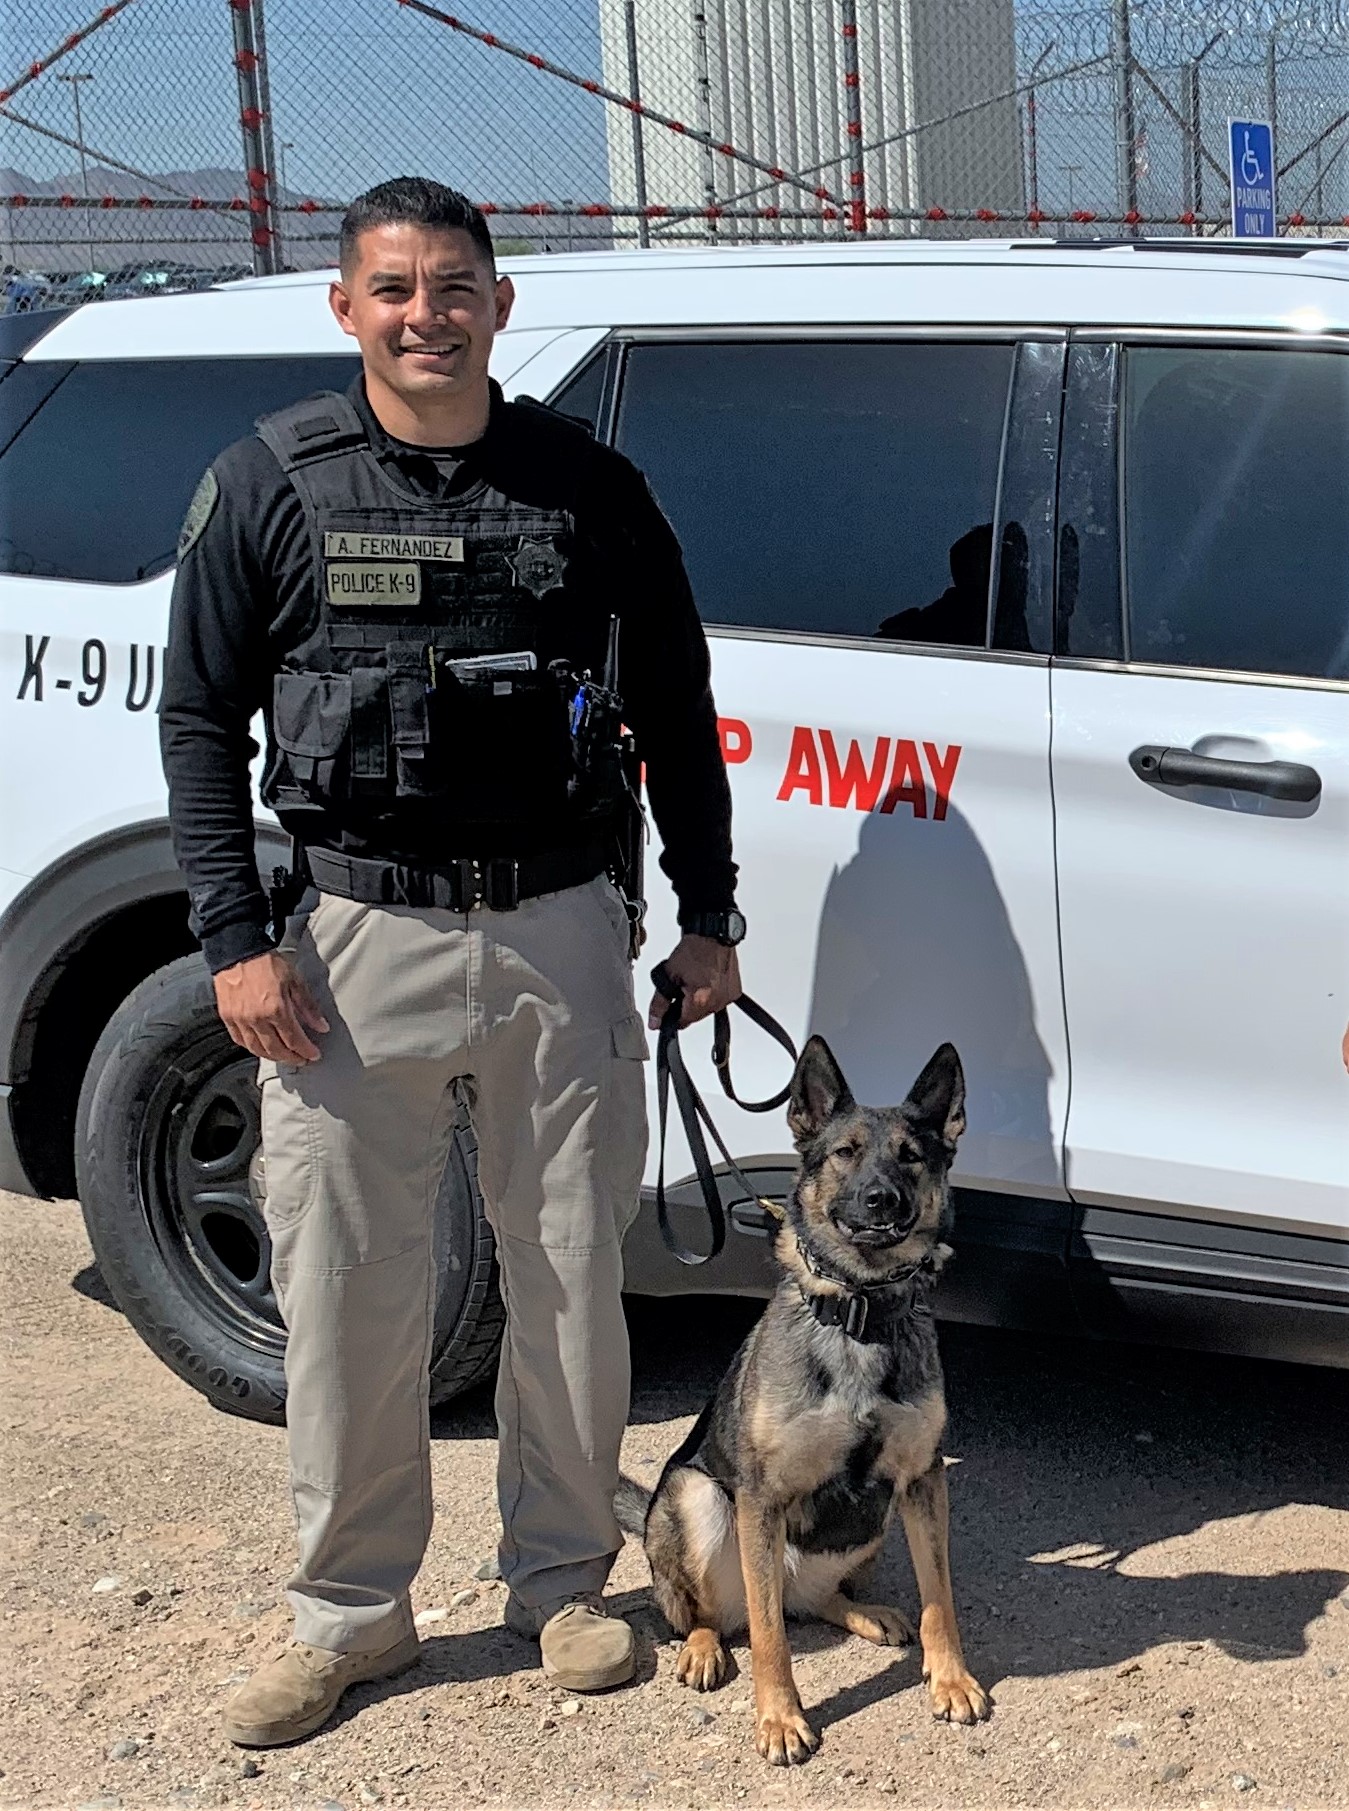 Correctional officer and his K-9 in front of a vehicle.